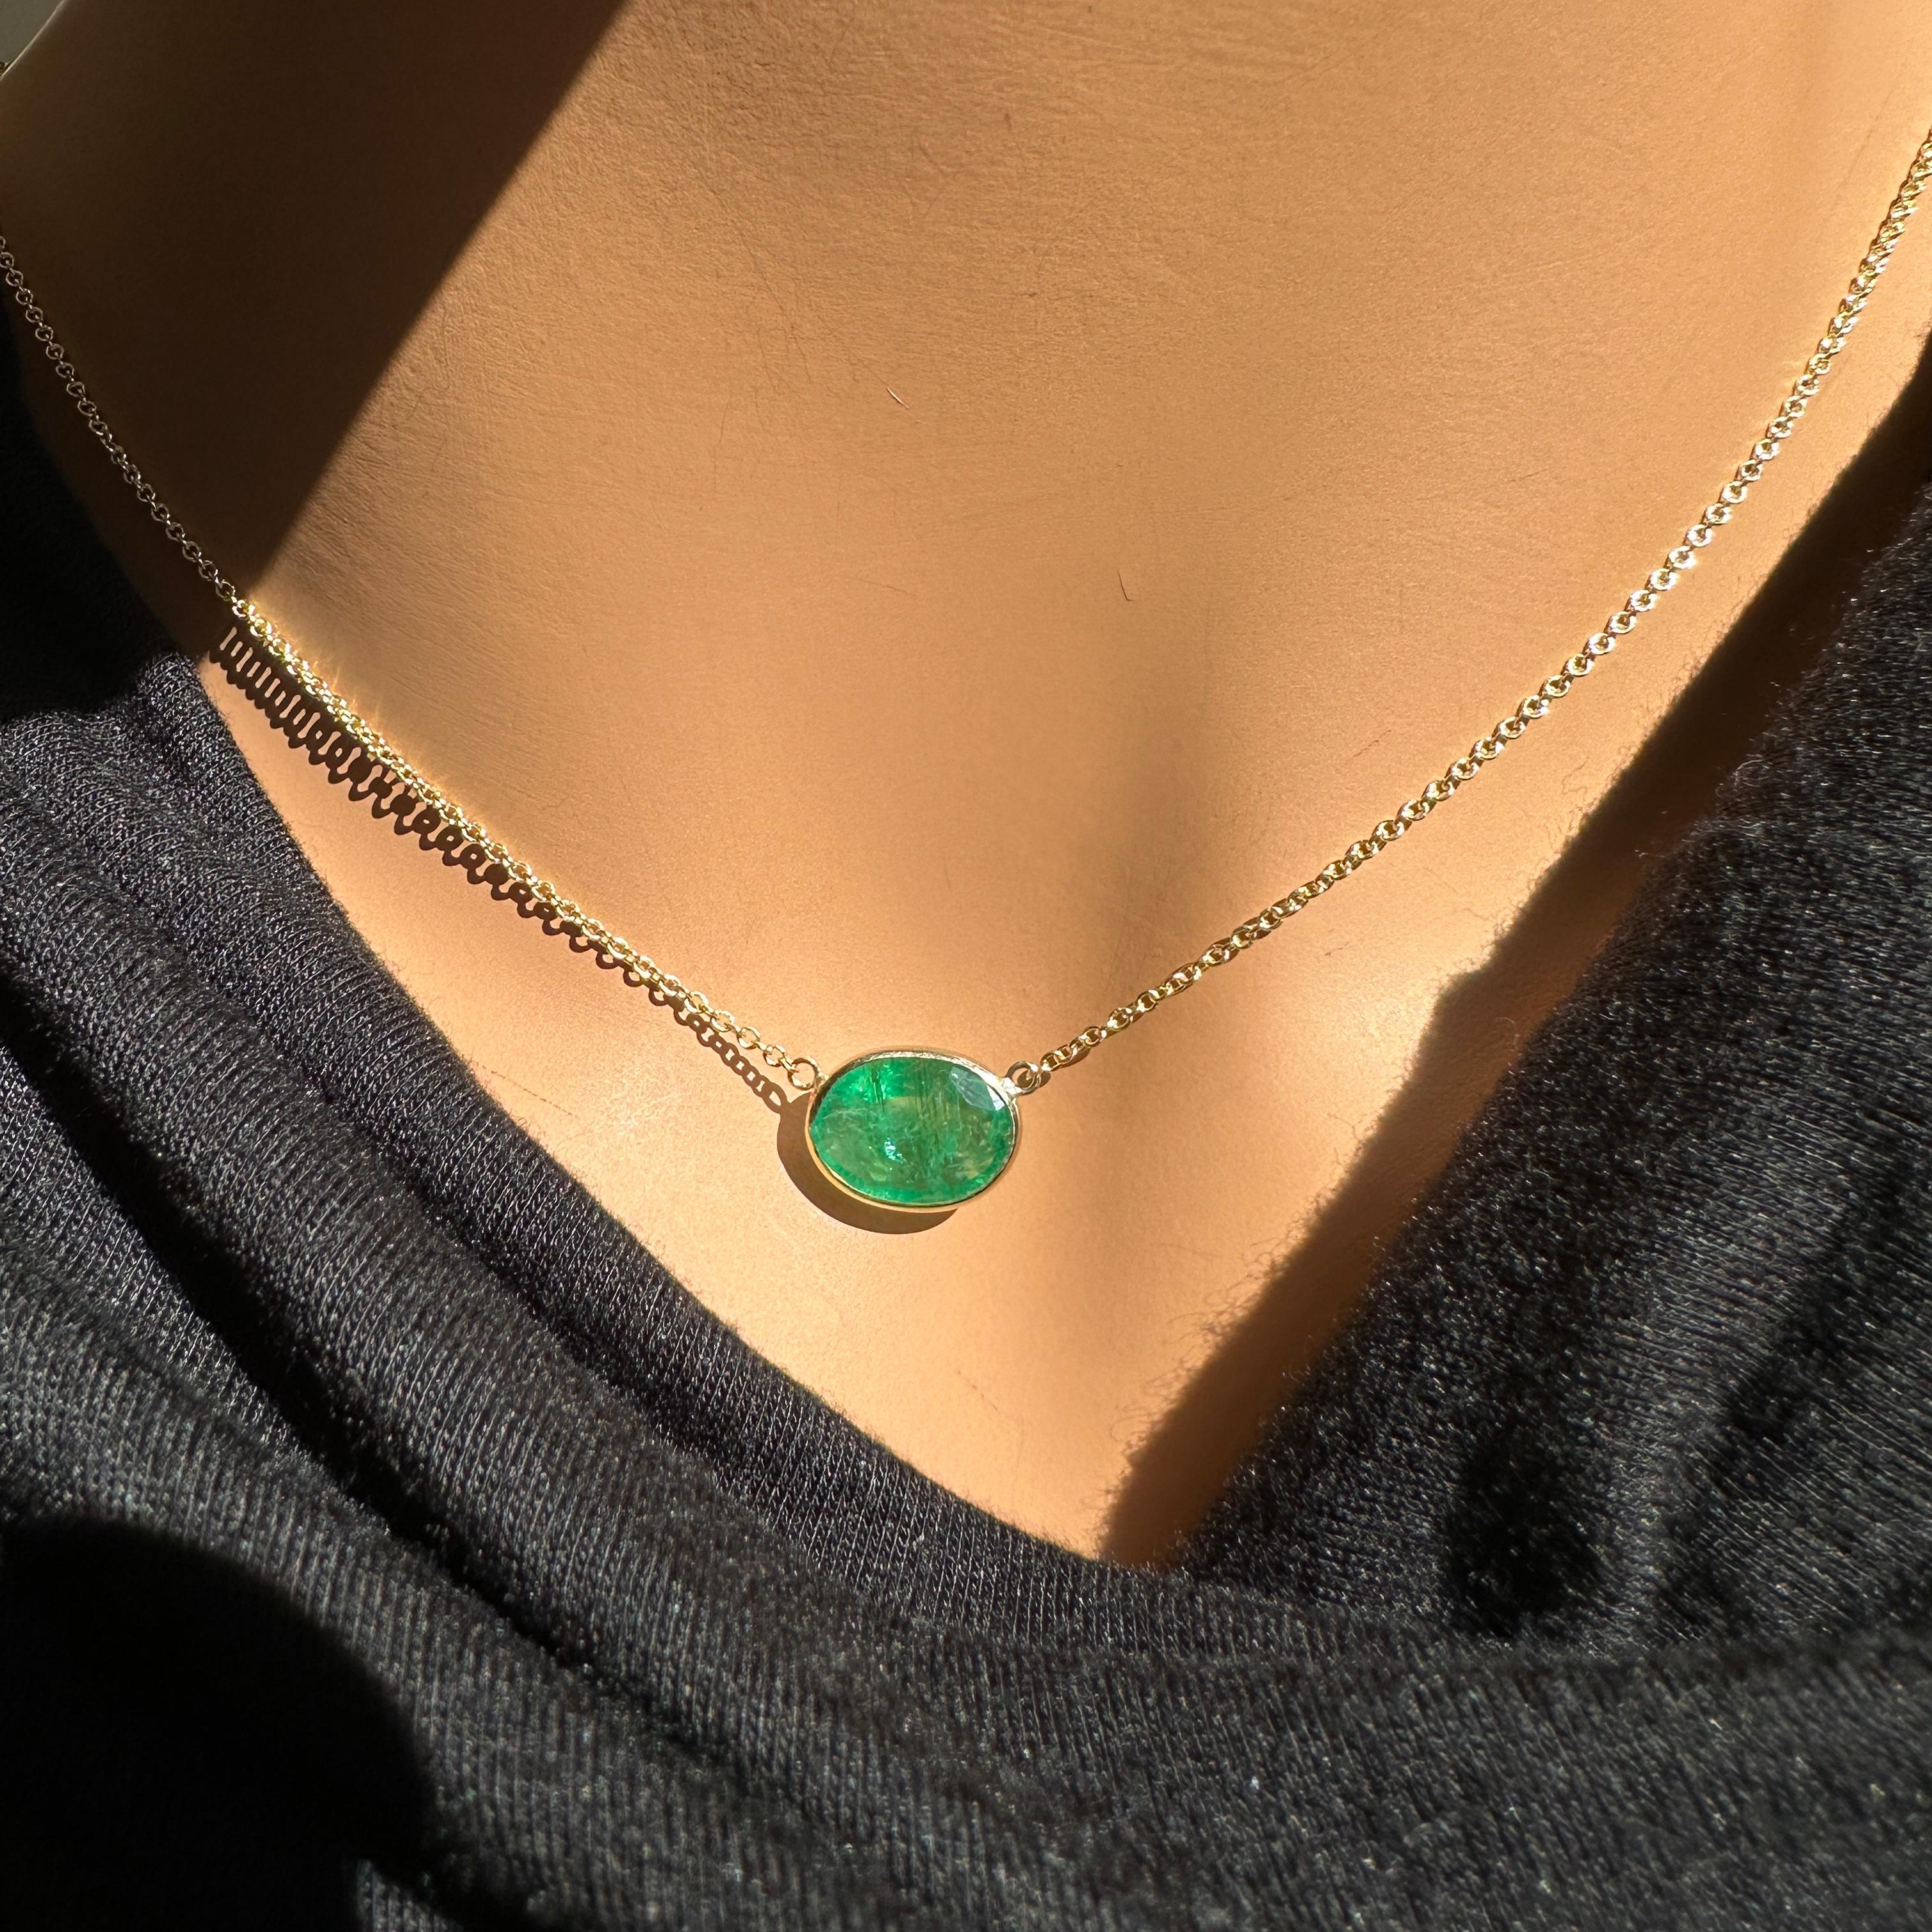 A fashion necklace crafted in 14k yellow gold with a main stone of an oval-cut emerald weighing 3.09 carats would be a stunning and luxurious choice. Emeralds are known for their captivating green color and timeless elegance, and the oval cut adds a